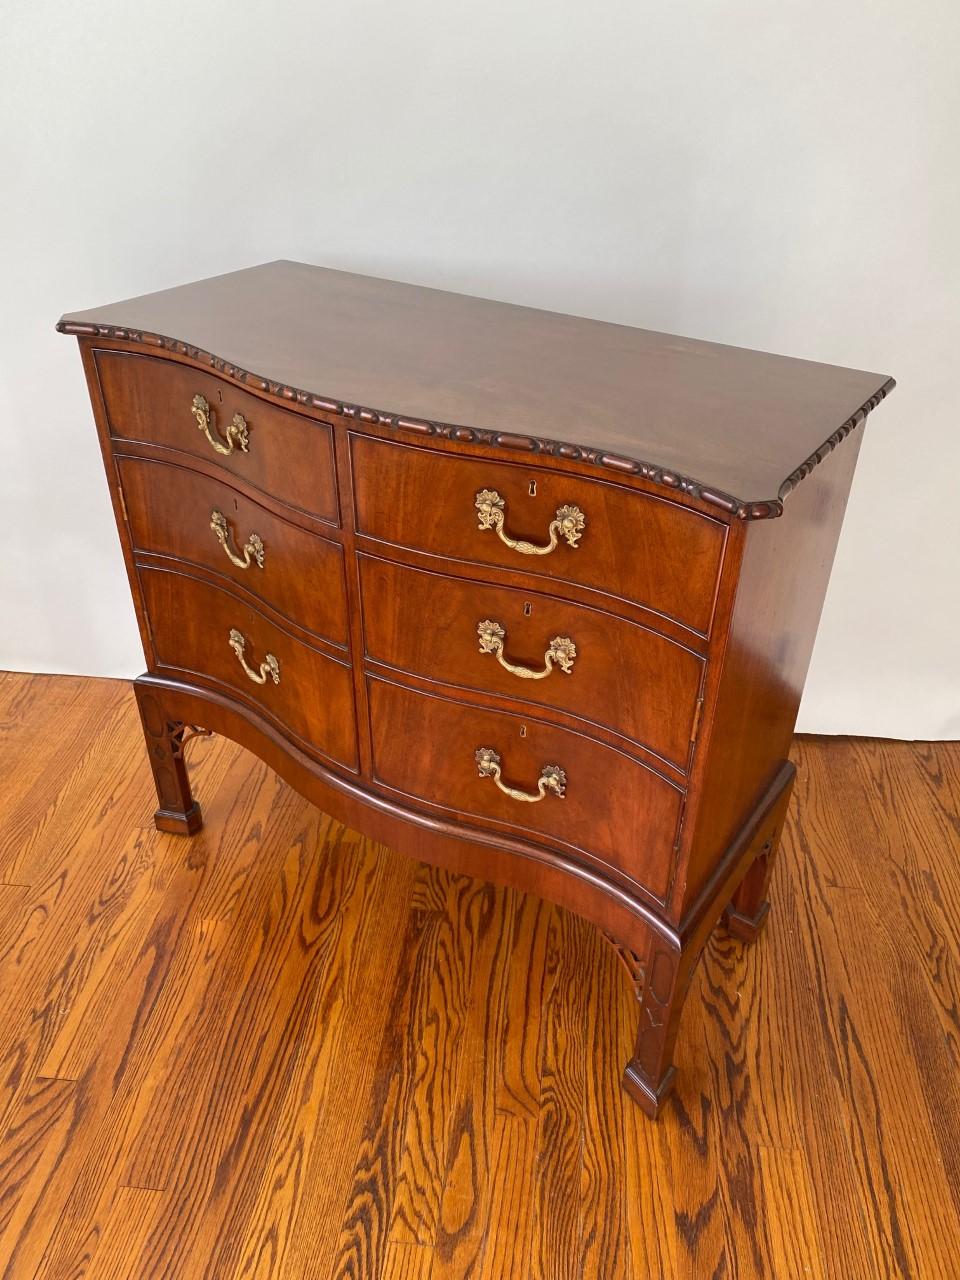 The unique and handsome English-made Chippendale style serpentine front commode on stand is made from selected Mahogany and is exquisitely carved by hand. The top two fitted box drawers are active; underneath them are false drawers concealing a